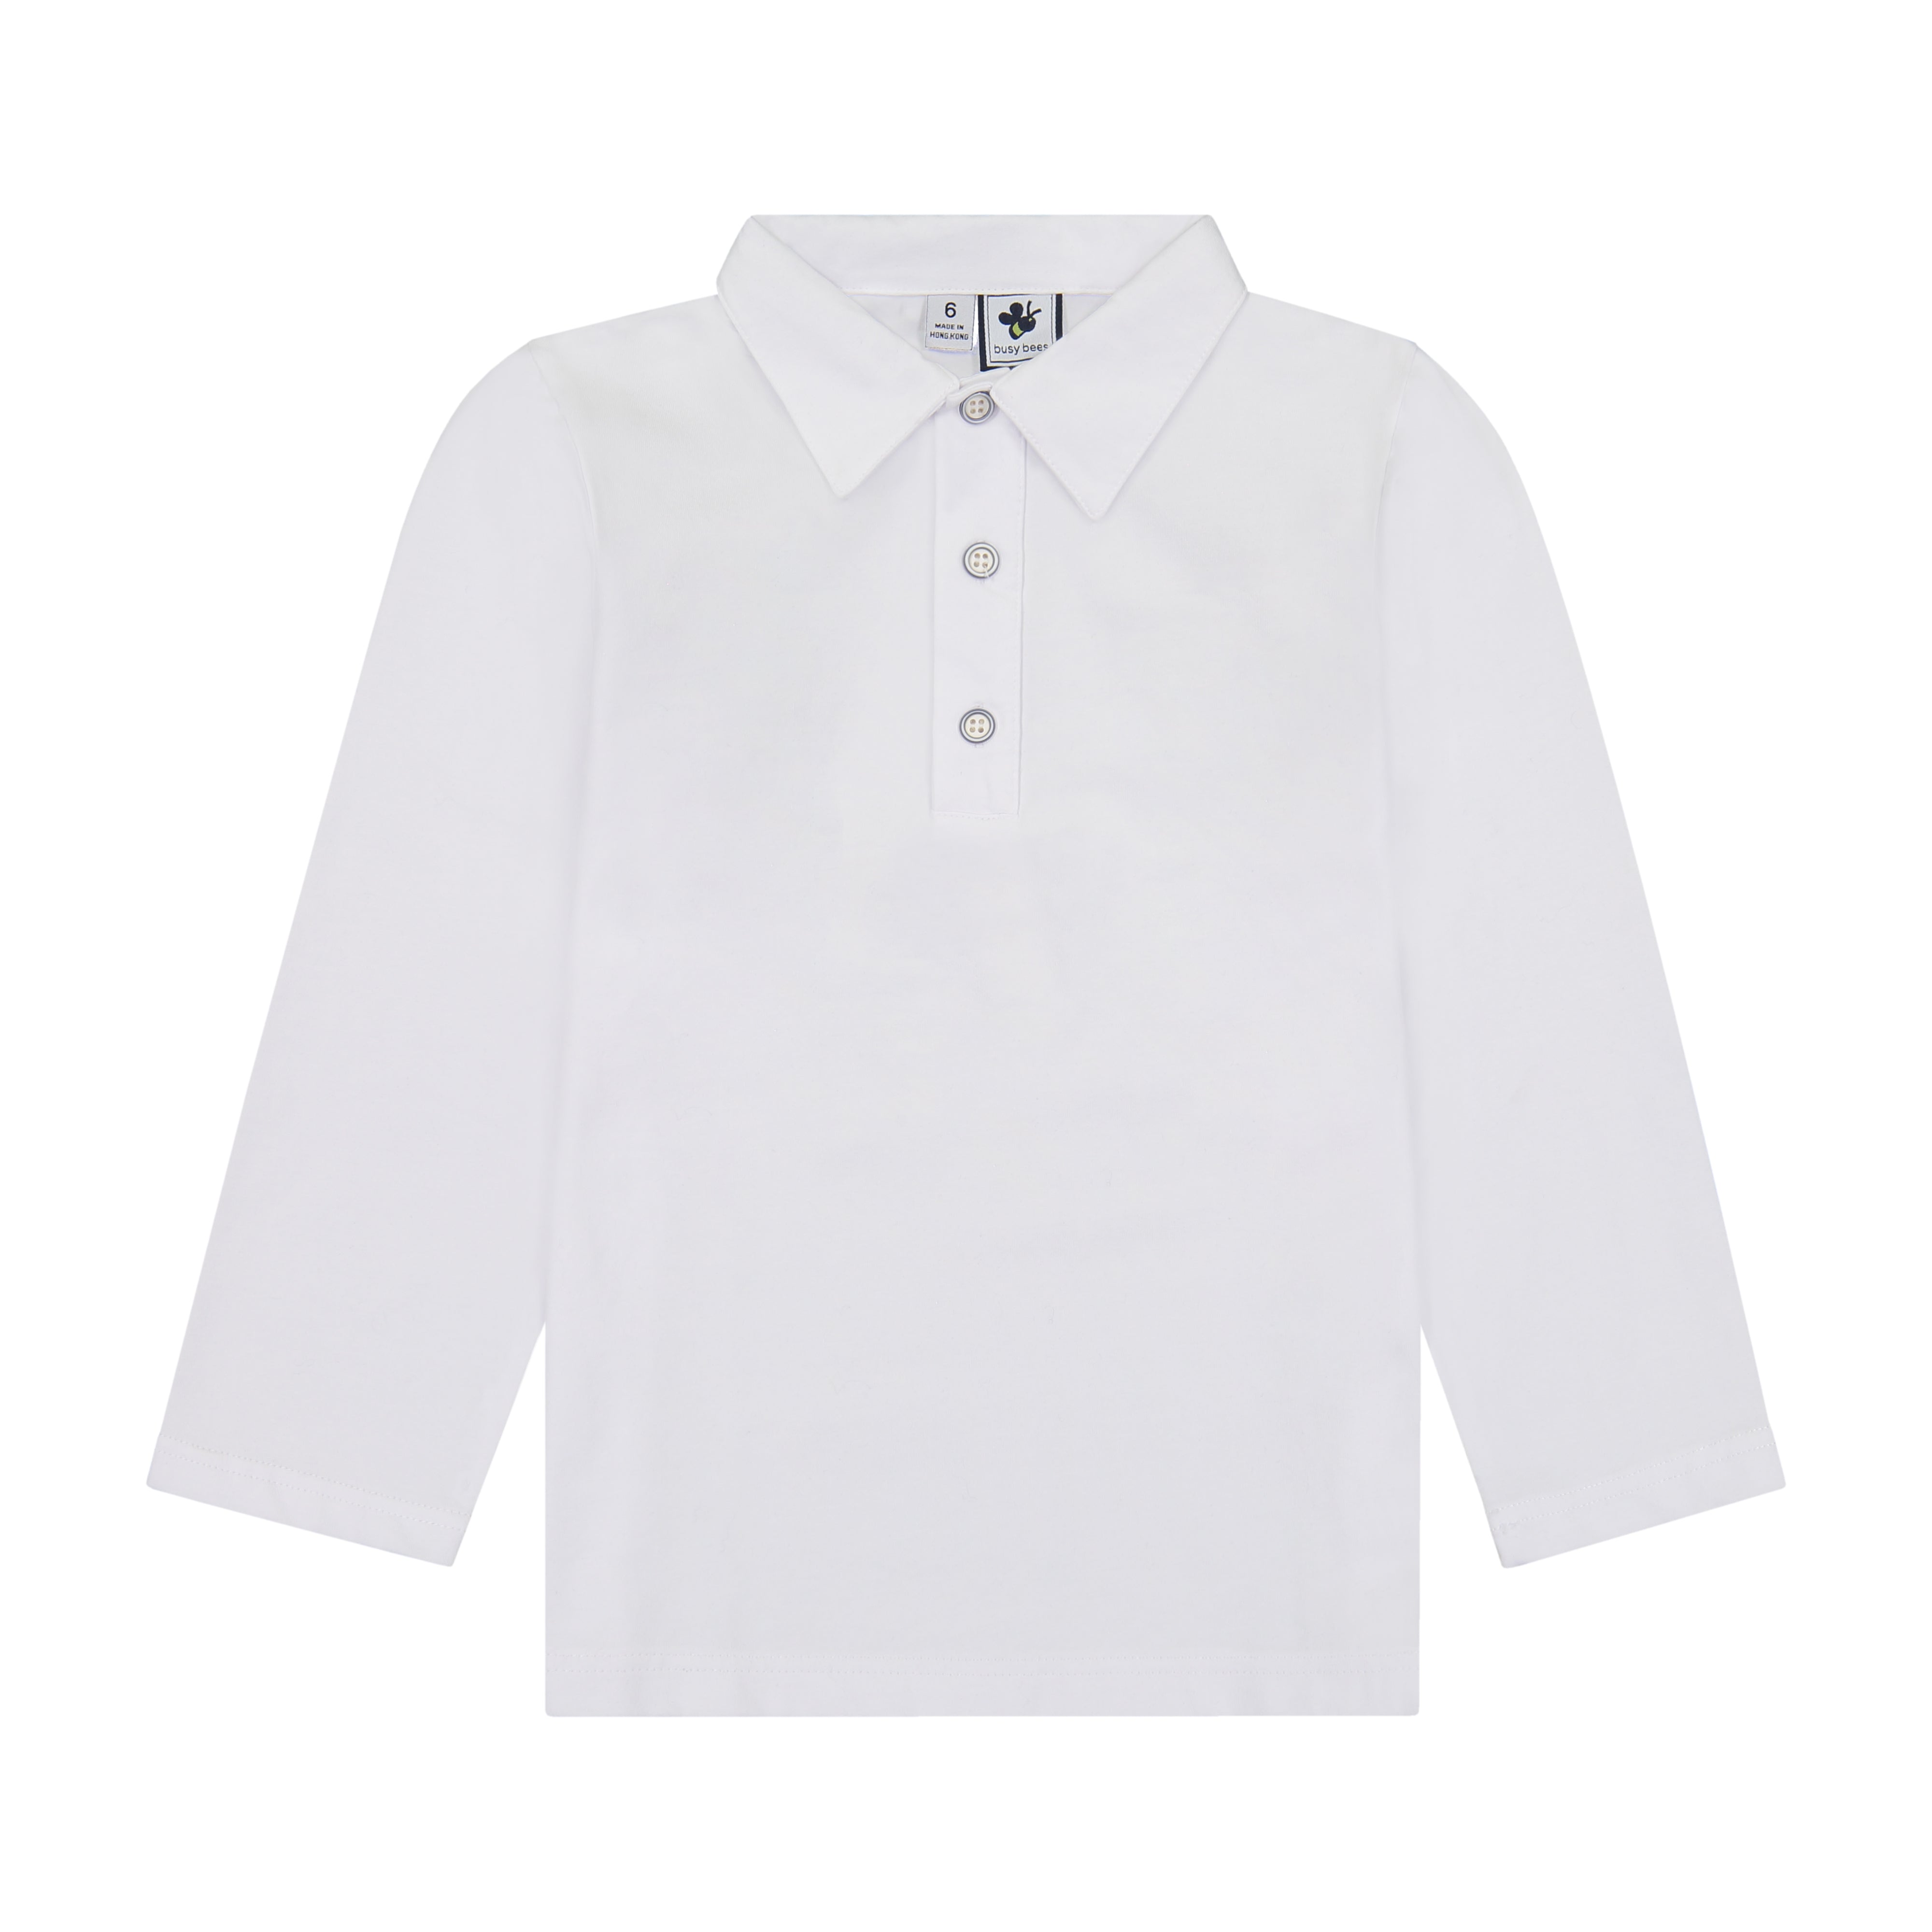 Busy Bees Boys Long Sleeve Polo White Knit